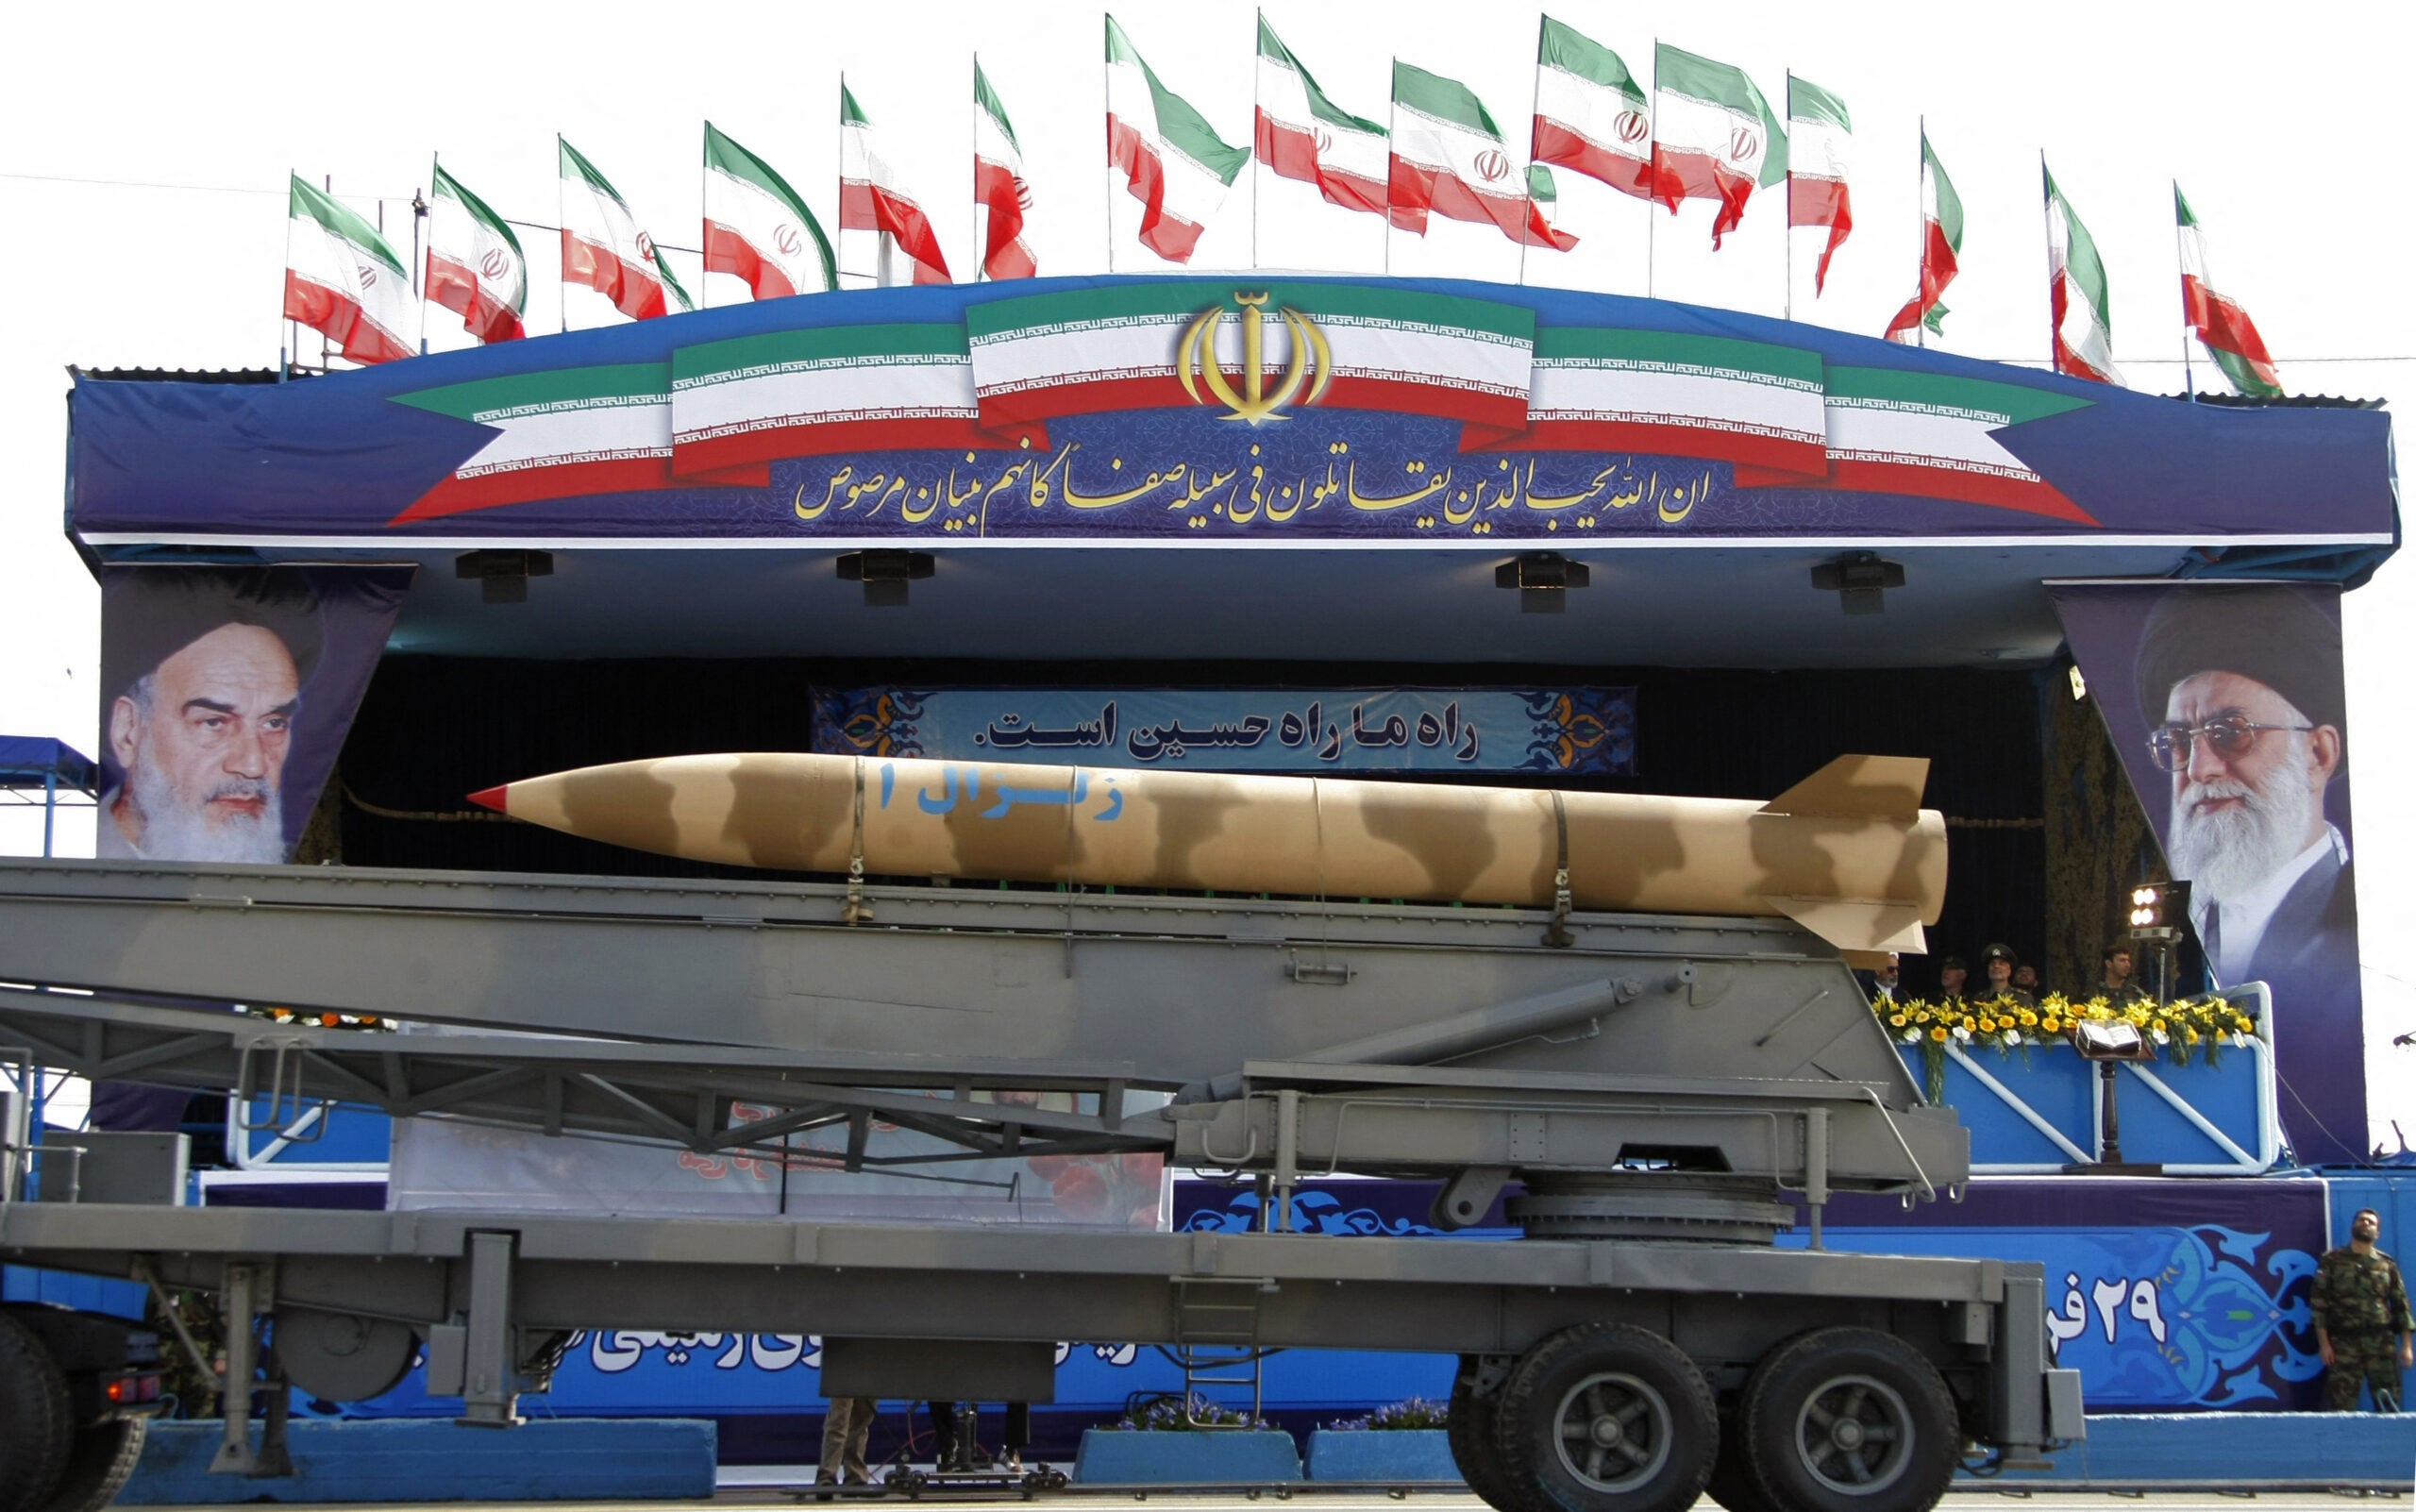 An Iranian surface-to-surface Zelzal-2 missile is driven past portraits of the Islamic republic's supreme leader, Ayatollah Ali khamenei (R), and his predecessor, the late Ayatollah Ruhollah Khomeini (L), during the Army Day parade in Tehran on April 18, 2009. Iranian President Mahmoud Ahmadinejad hailed his country's armed forces as the "guarantor" of regional security, during the low-profile parade in the capital. AFP PHOTO/BEHROUZ MEHRI (Photo by Behrouz MEHRI / AFP) (Photo by BEHROUZ MEHRI/AFP via Getty Images)